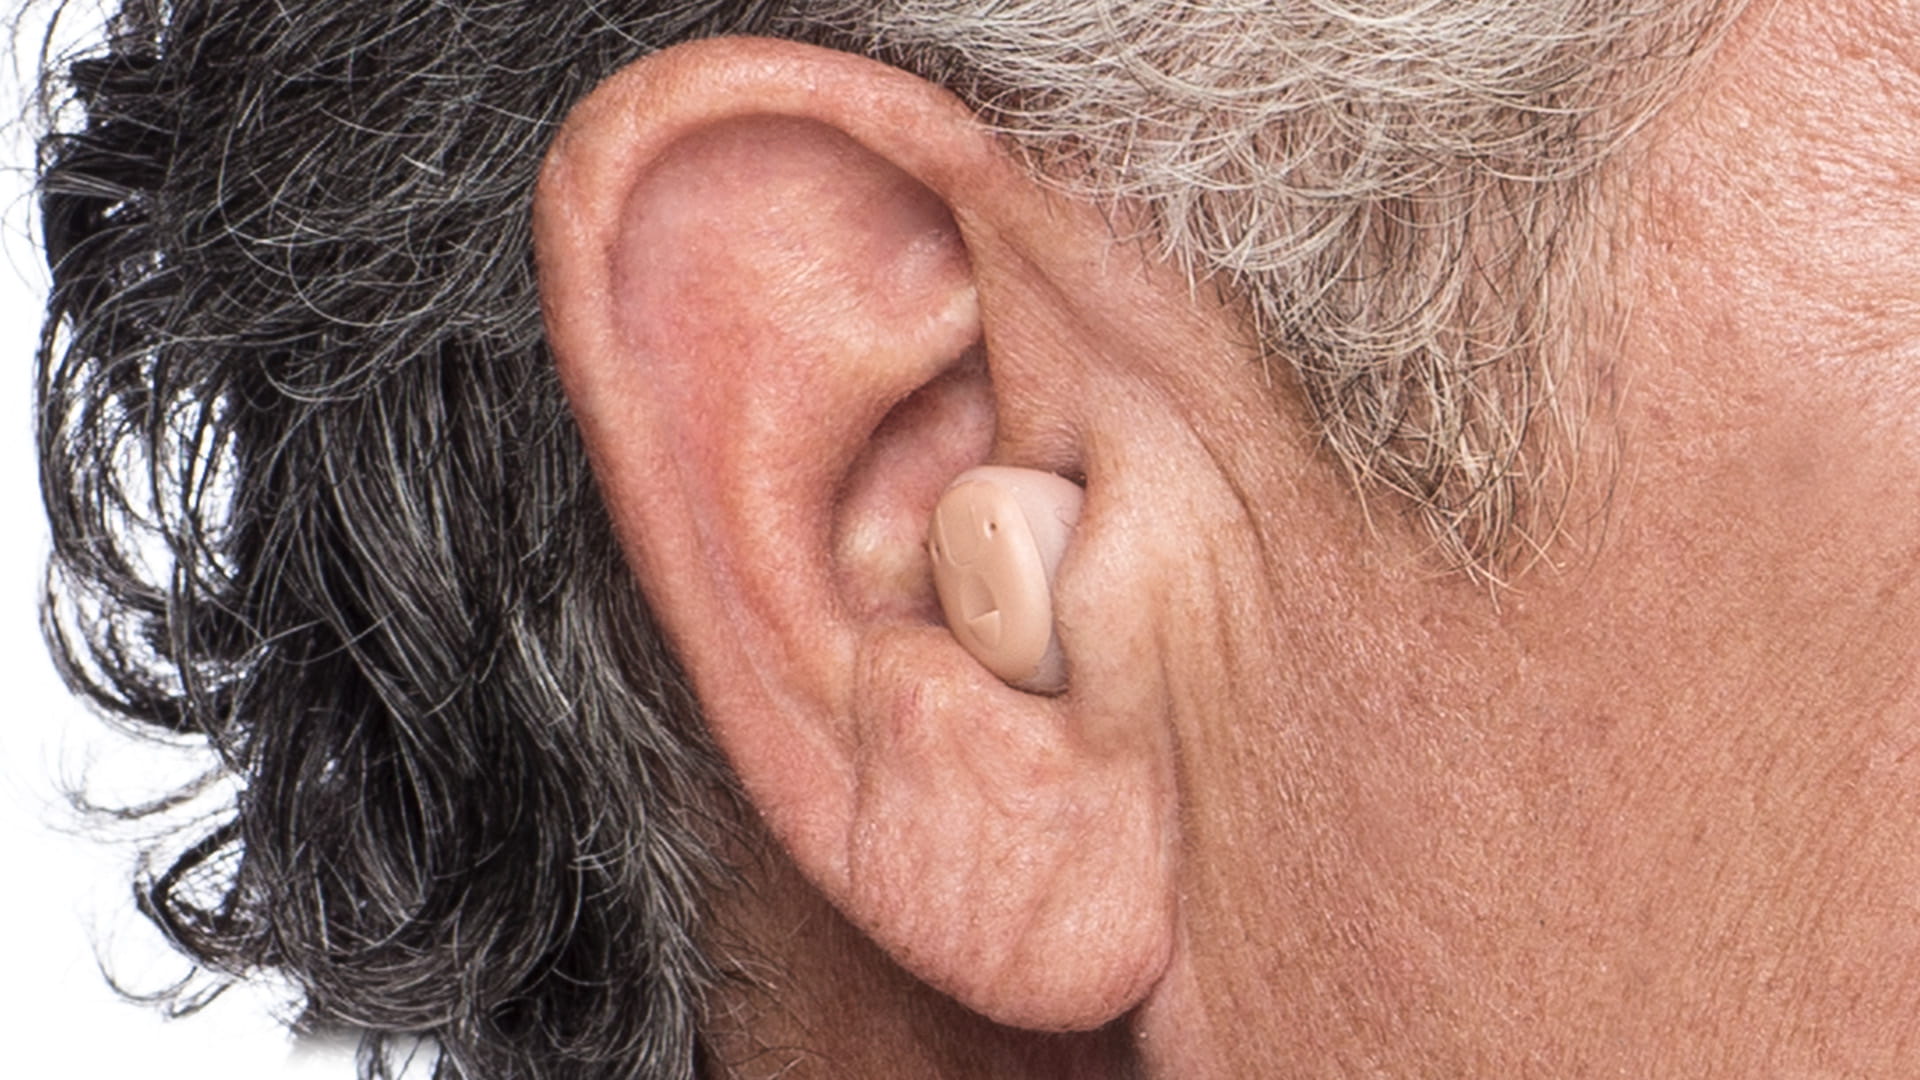 Man with hearing aid in-the-ear